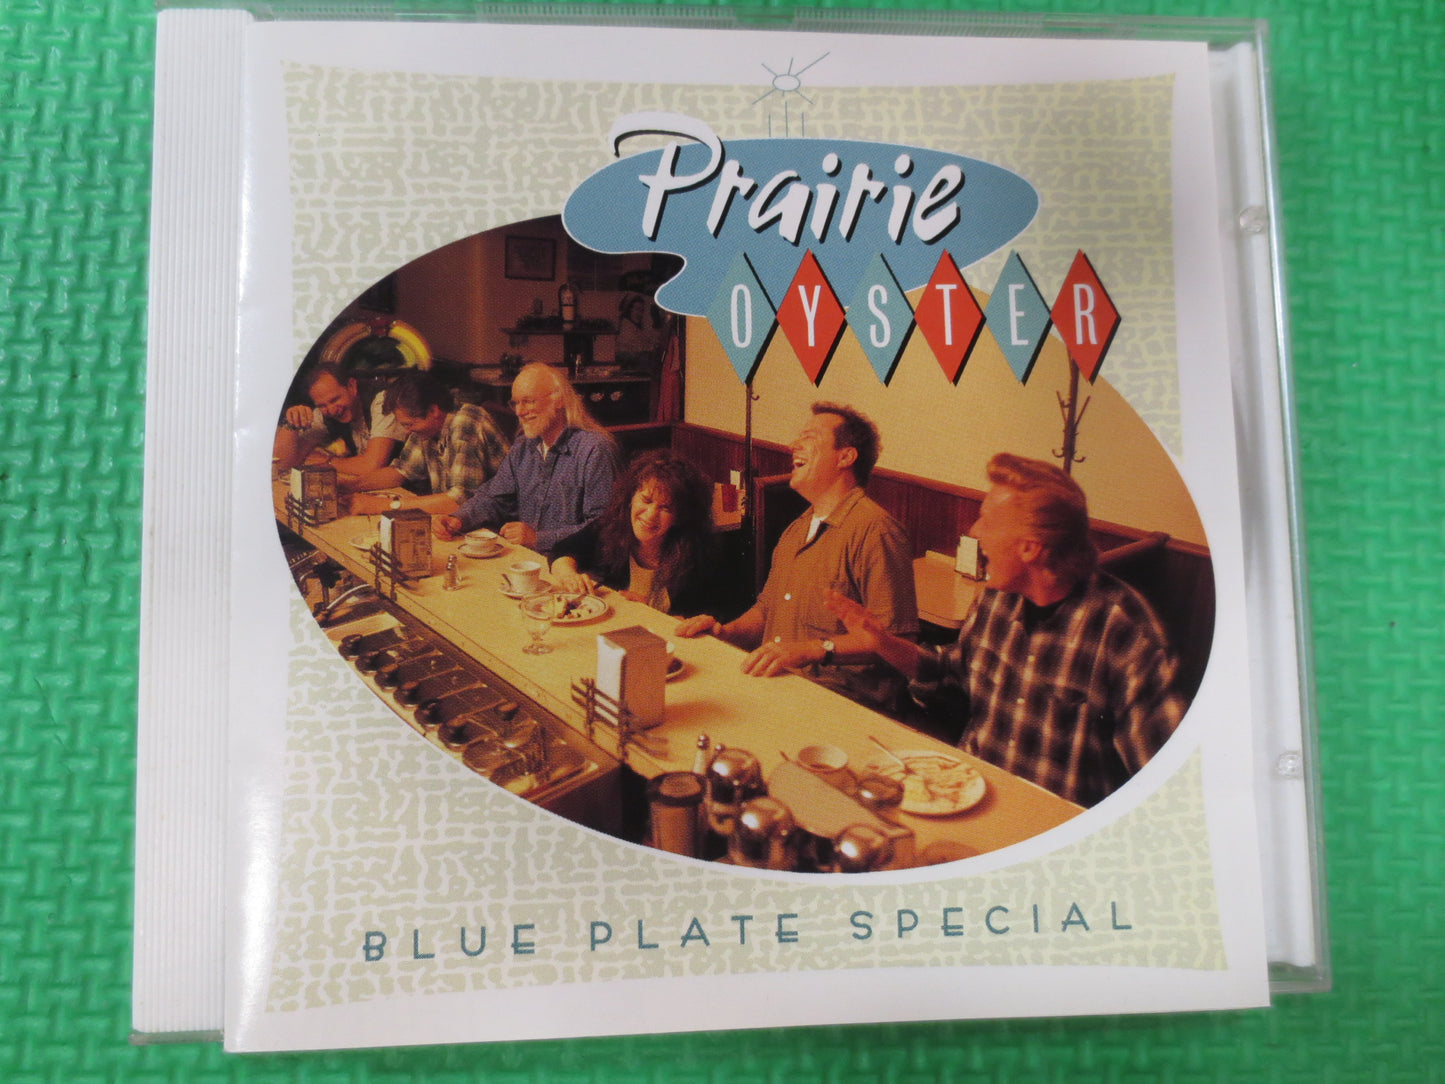 PRAIRIE OYSTER, Prairie Oyster Cd, Blue Plate SPECIAL, Country Cd, Pop Cd, Country Lp, Country Album, 1986 Compact Discs